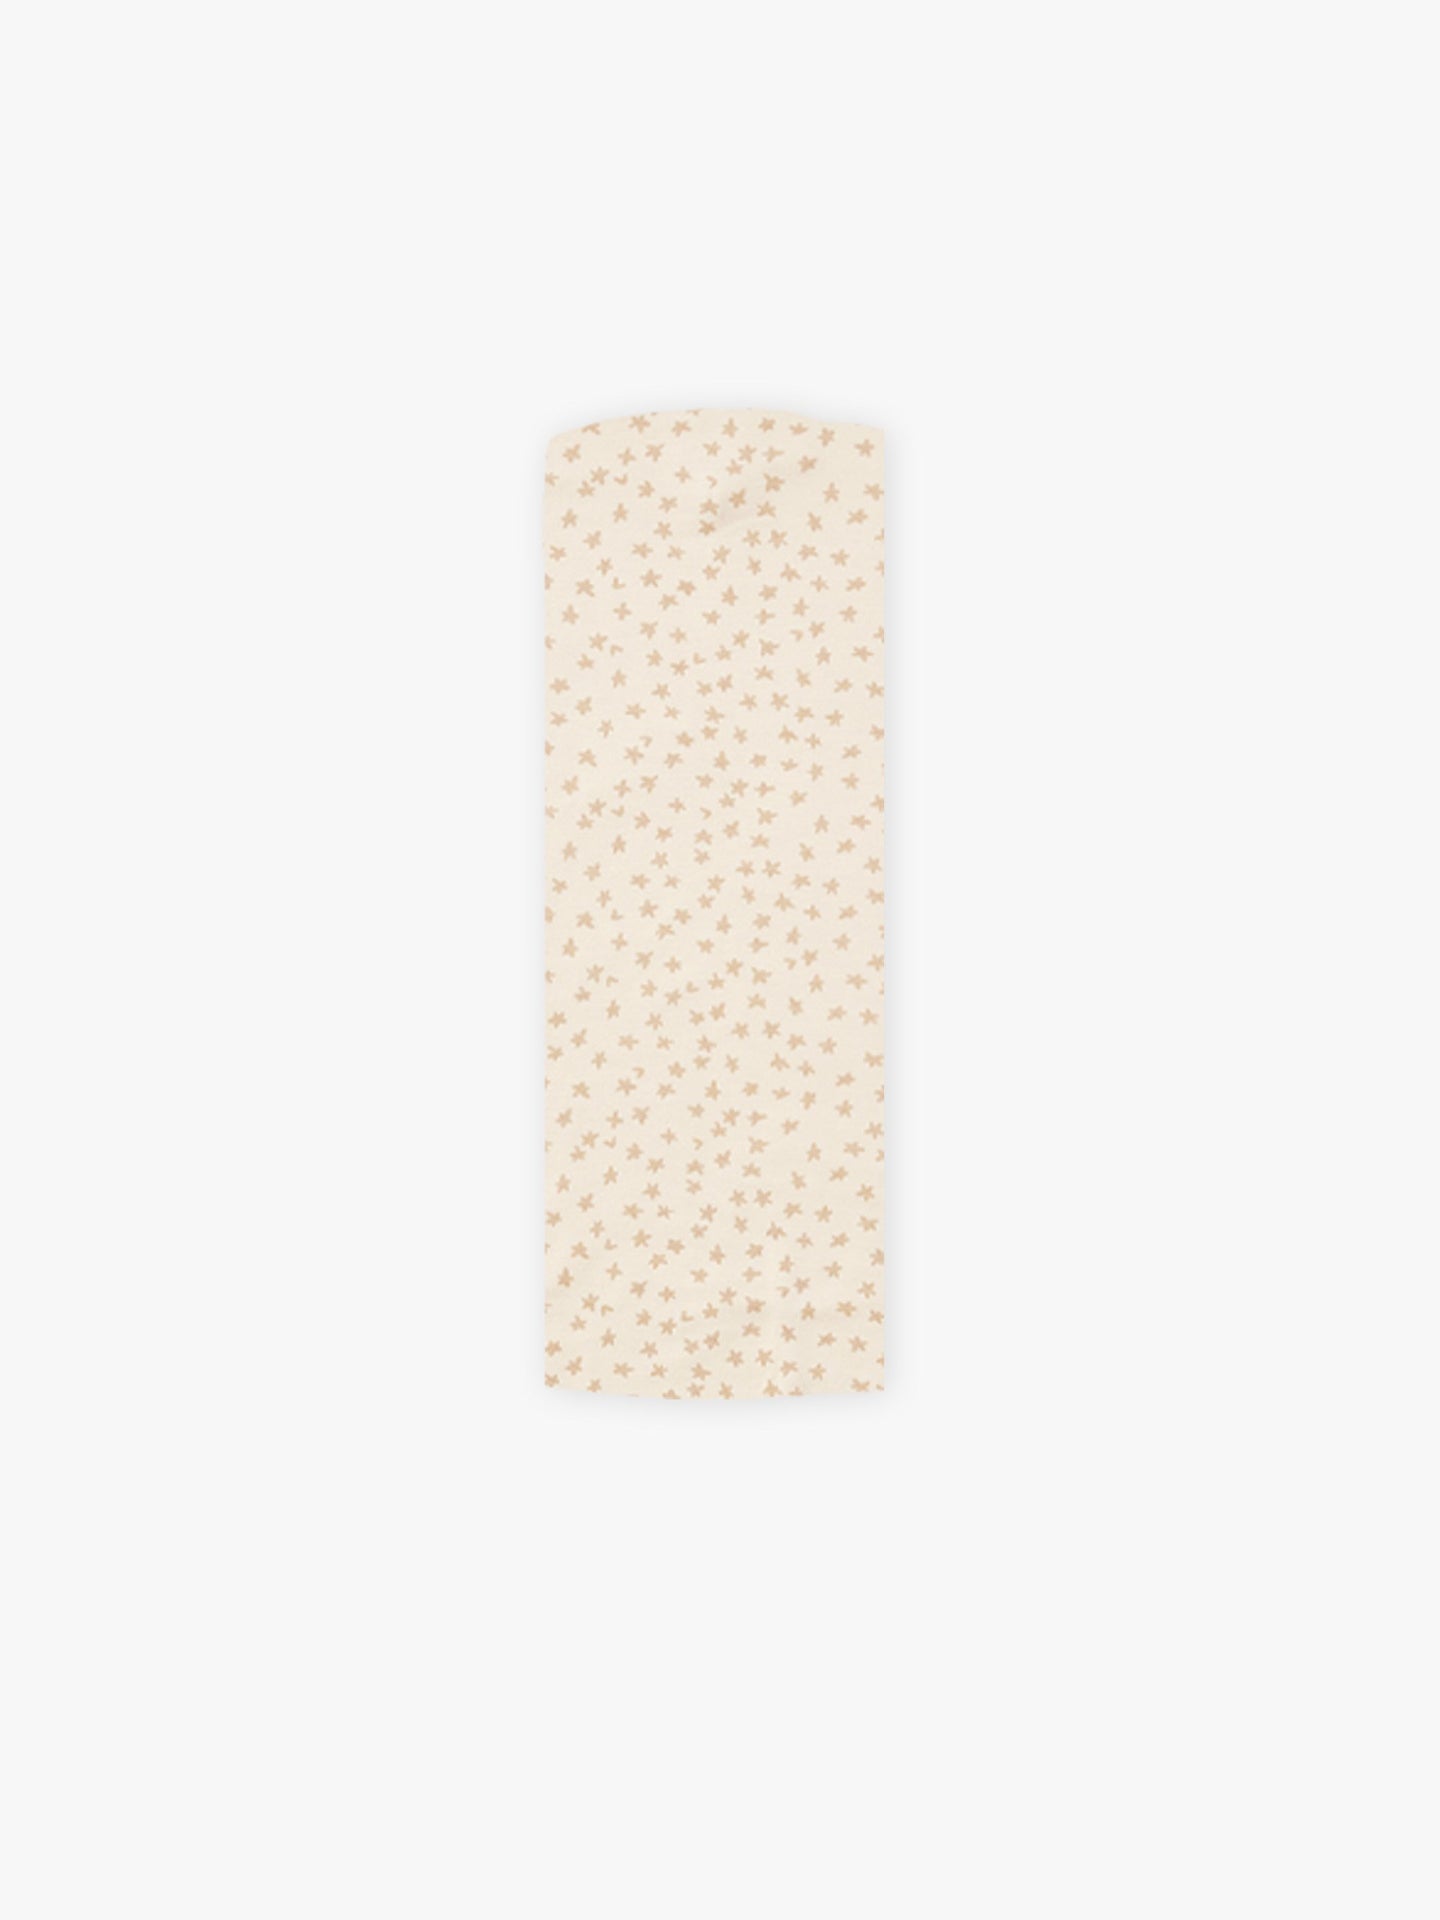 Quincy Mae - Scatter Bamboo Baby Swaddle - Natural